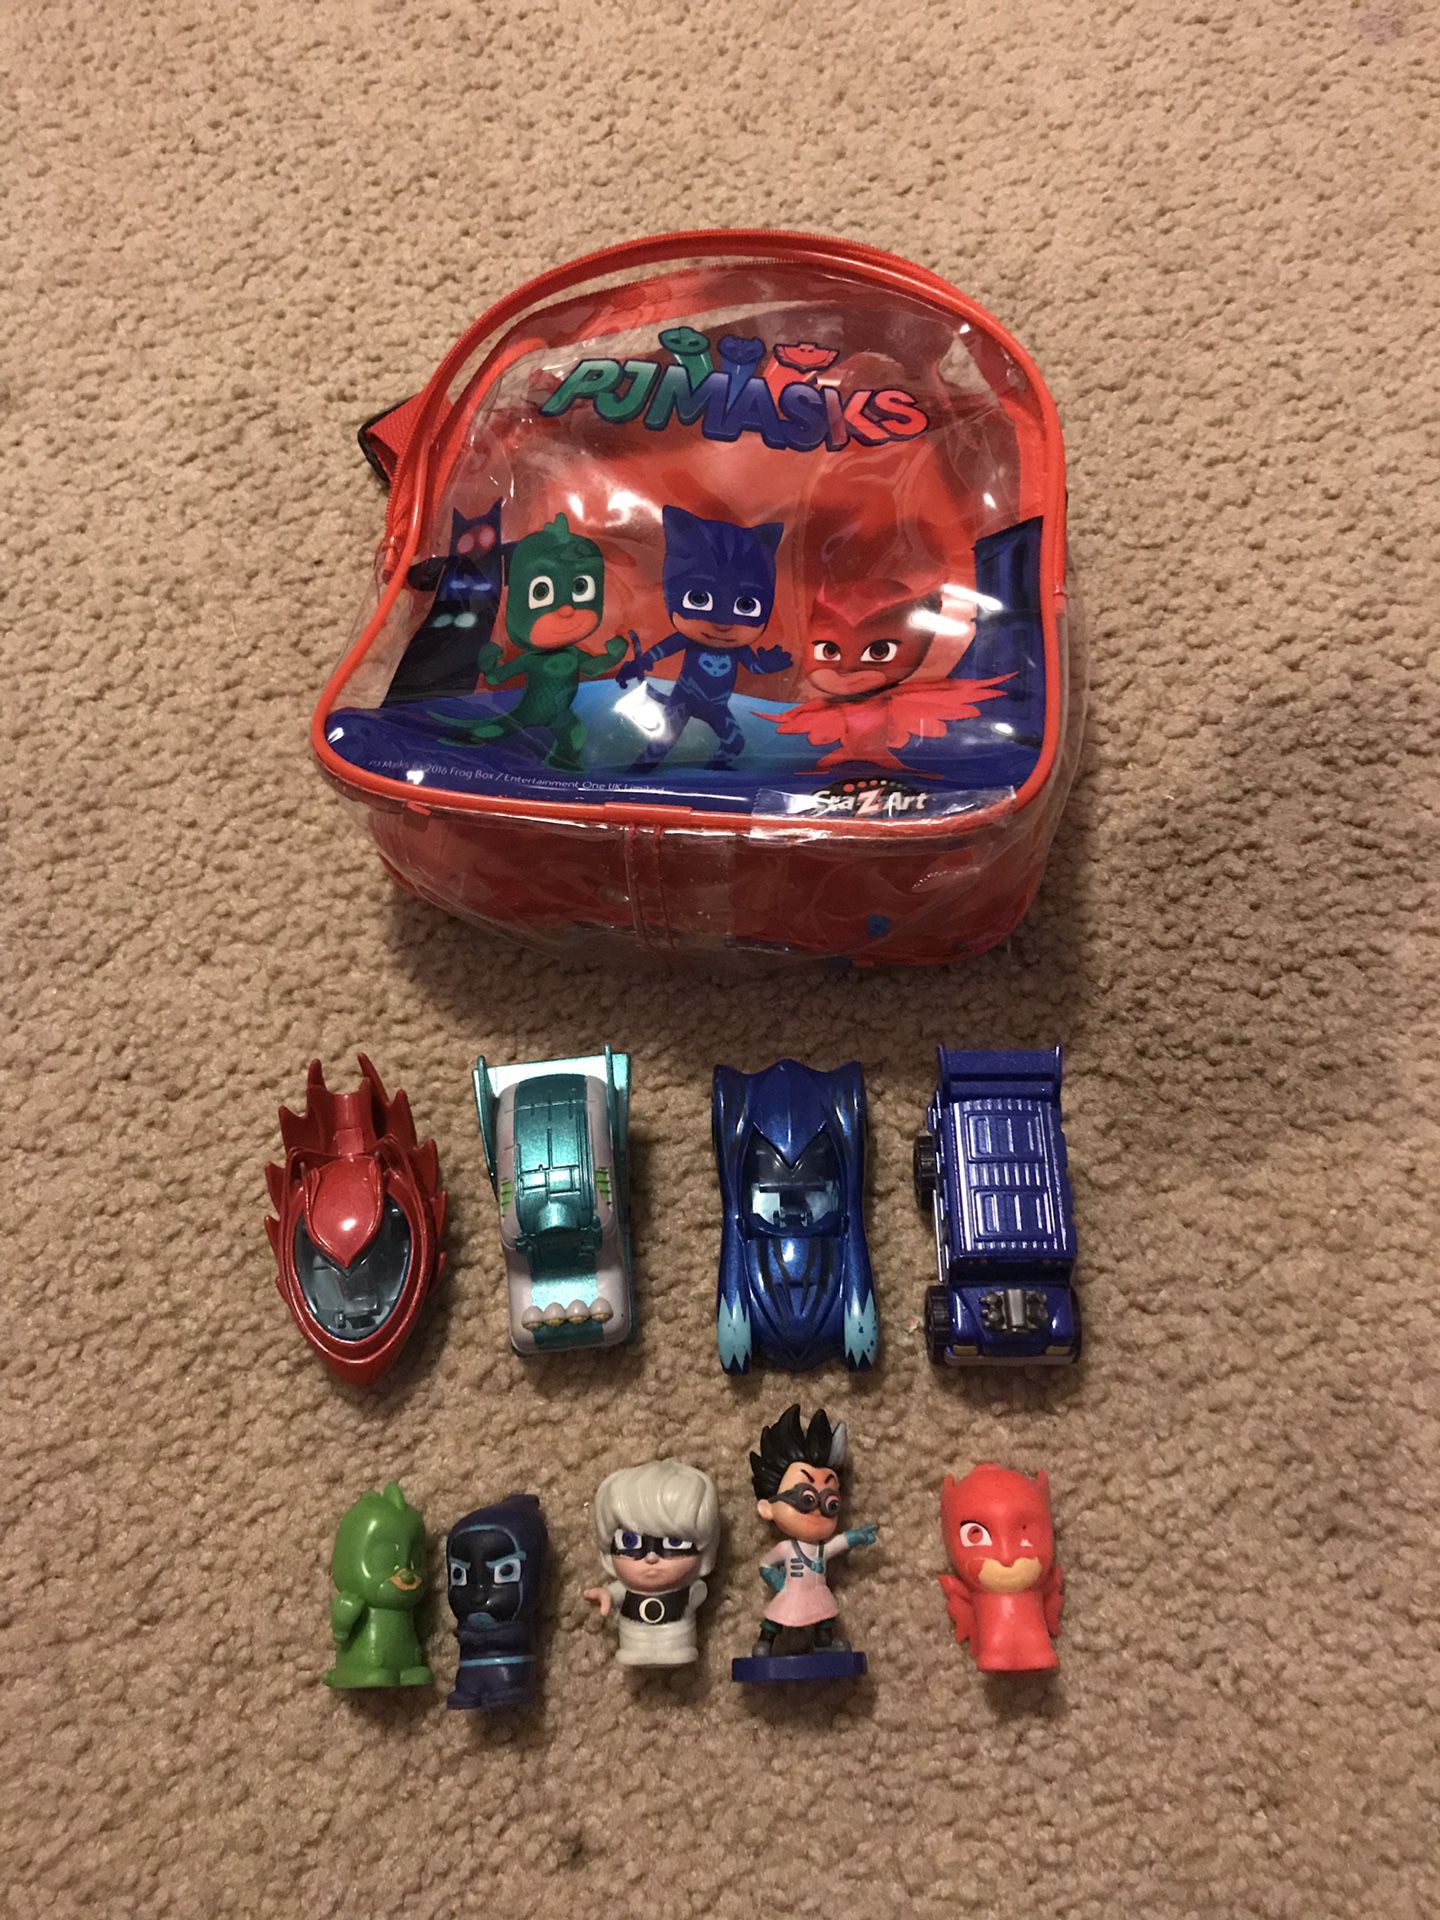 Pj mask cars and backpack